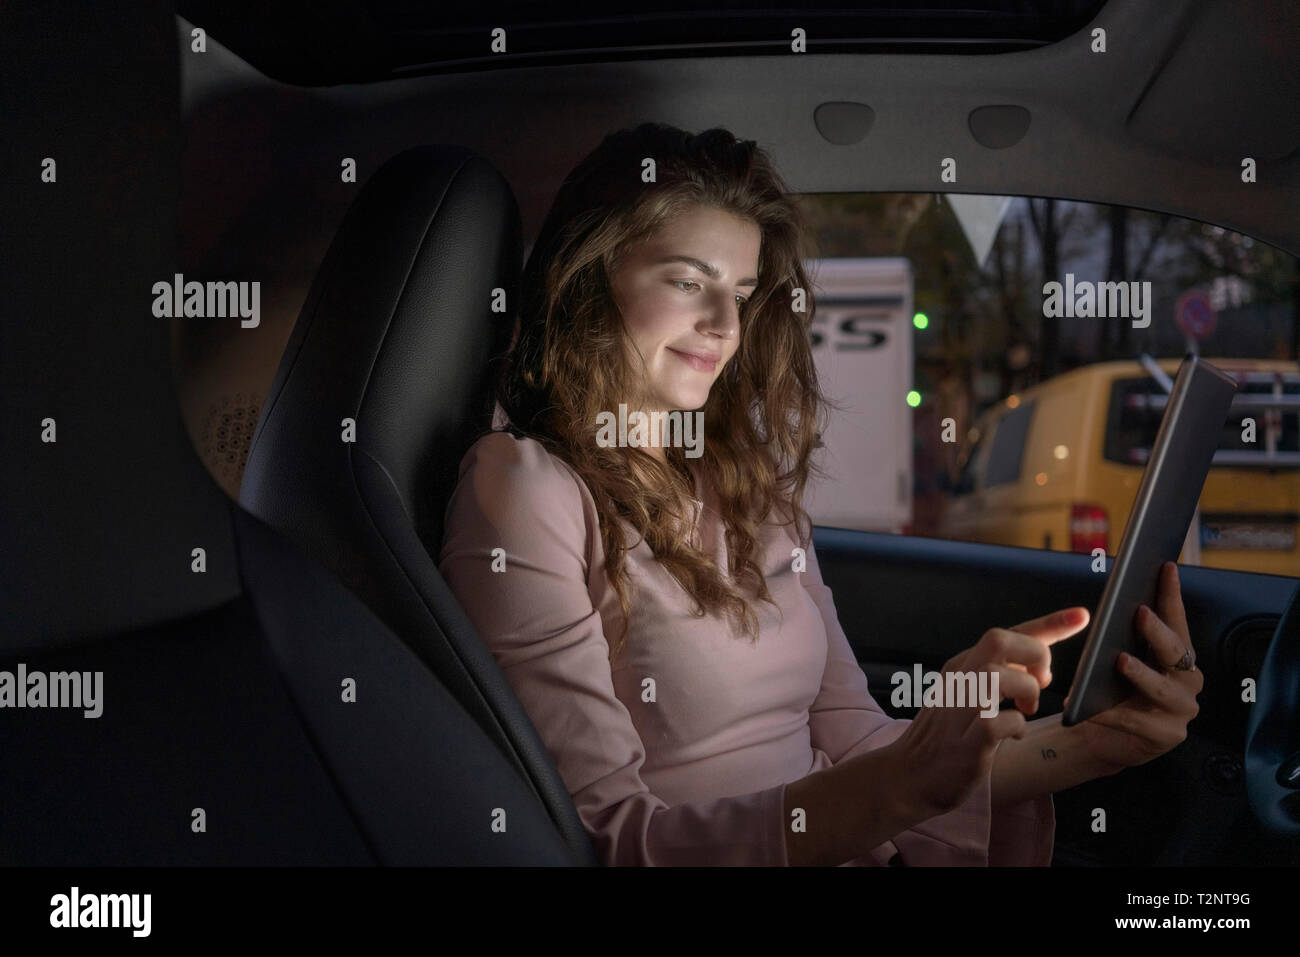 Young woman using digital tablet inside car Stock Photo